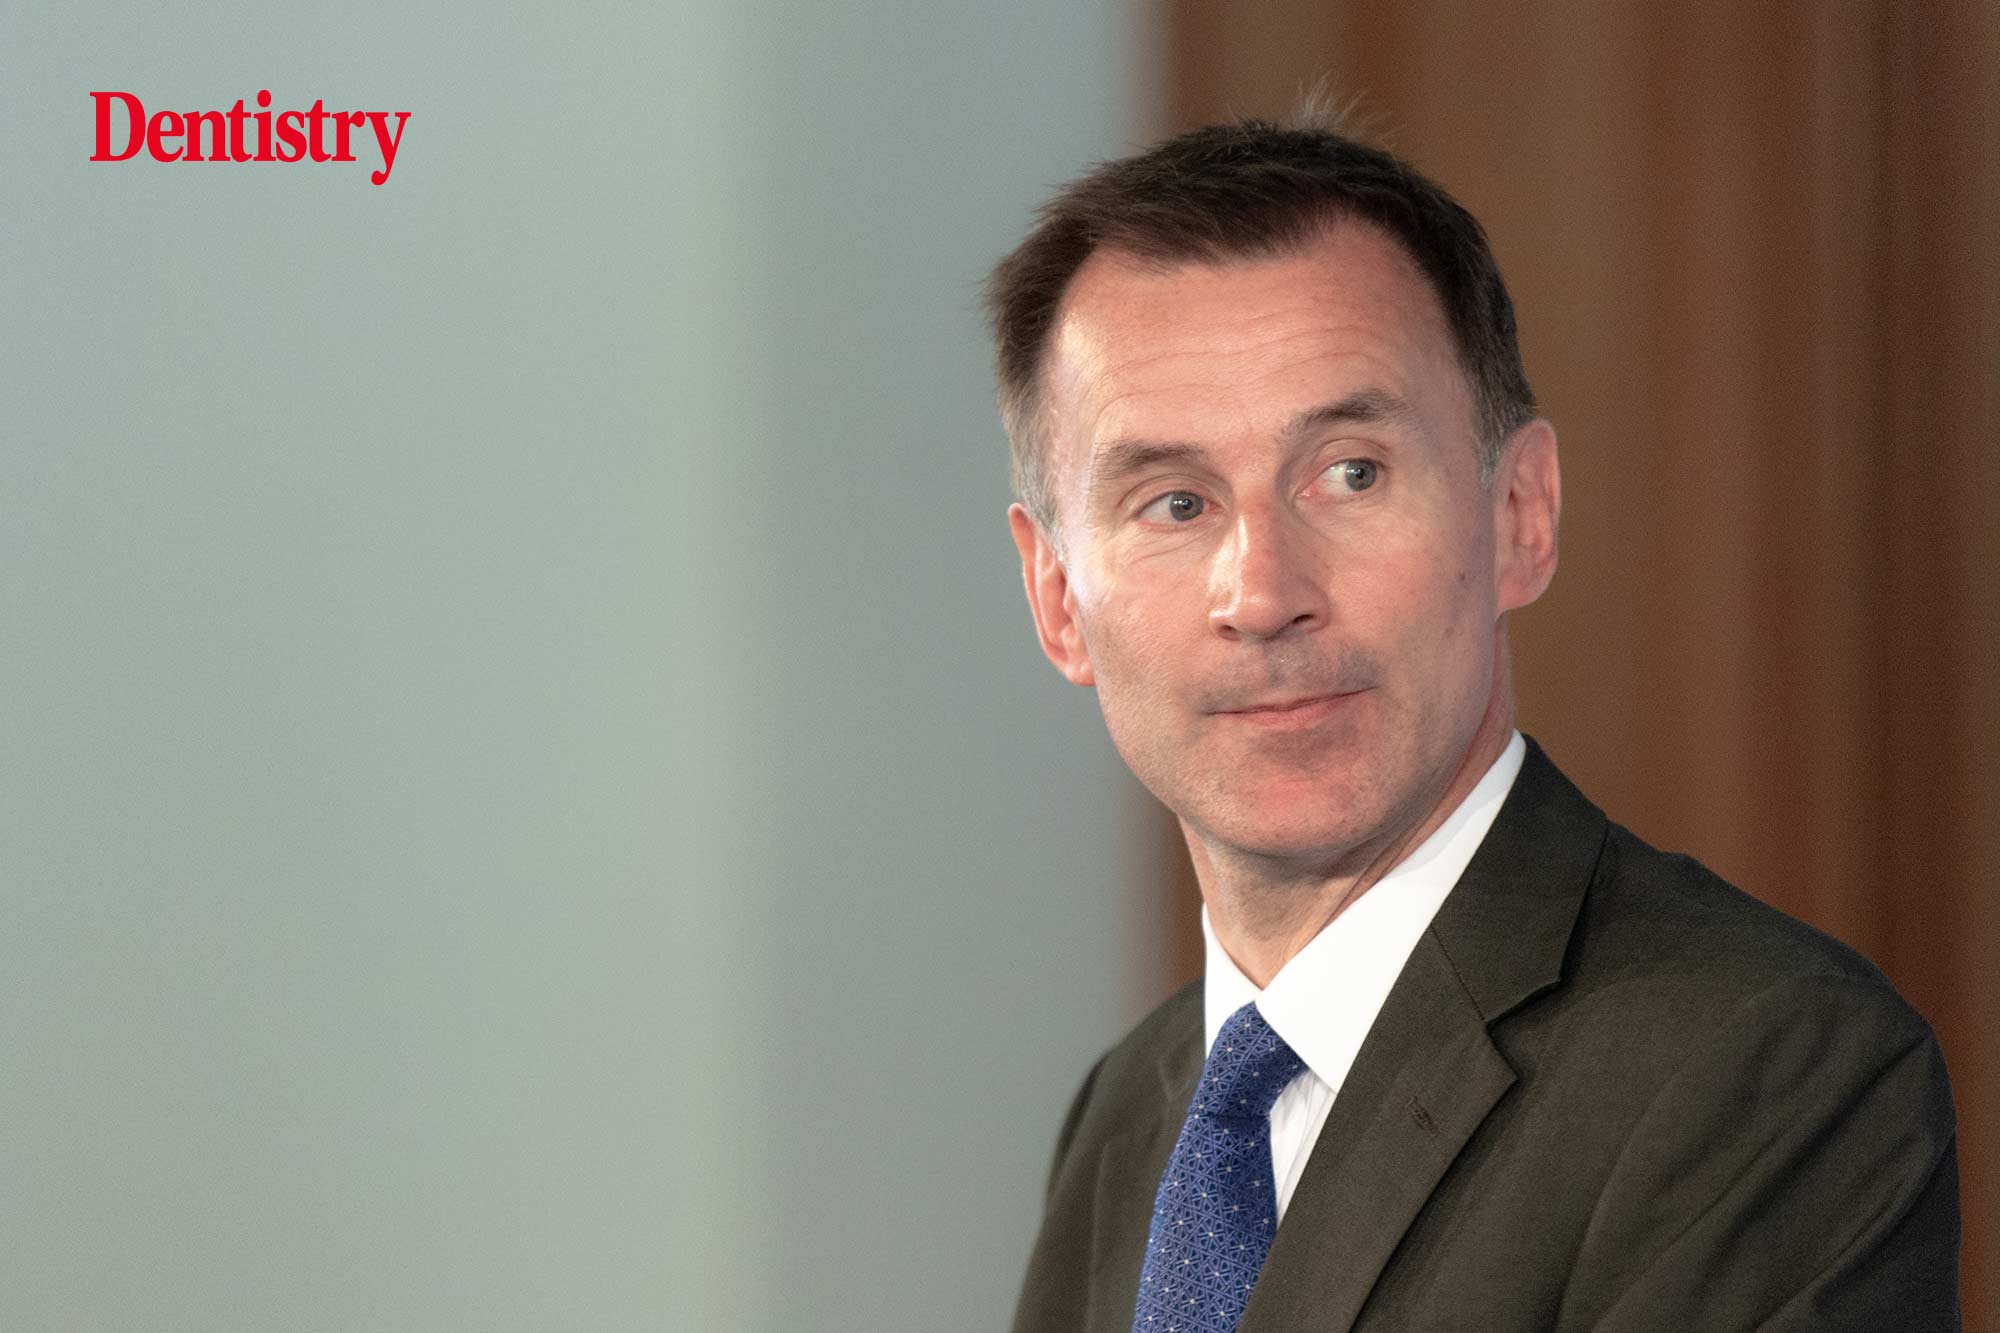 Chancellor Jeremy Hunt has today announced the 2022 Autumn Budget with hopes of tackling the cost of living crisis. But what do his new economic plans mean for dentistry?